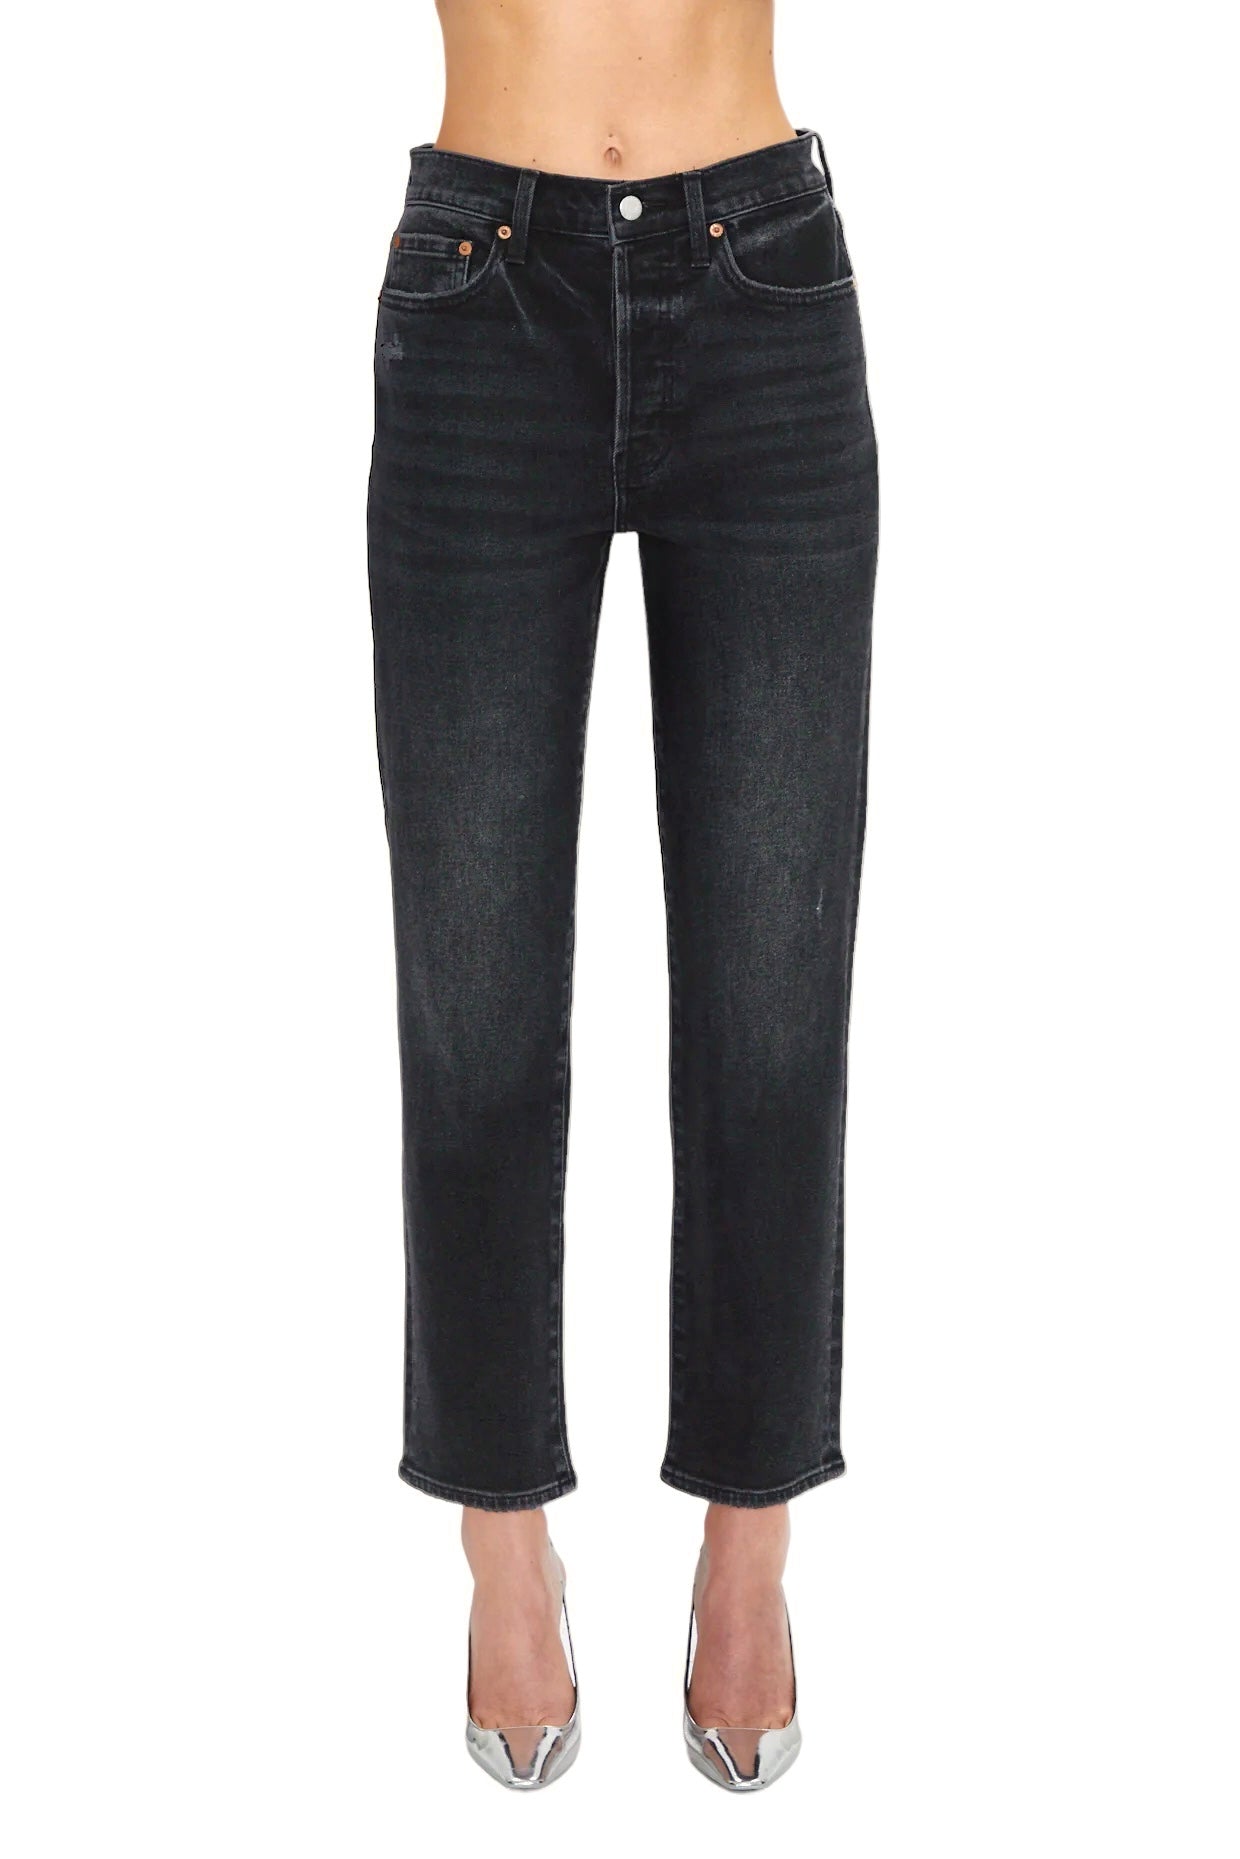 Charlie Classic Straight Jean in jubilee vintage by Pistola